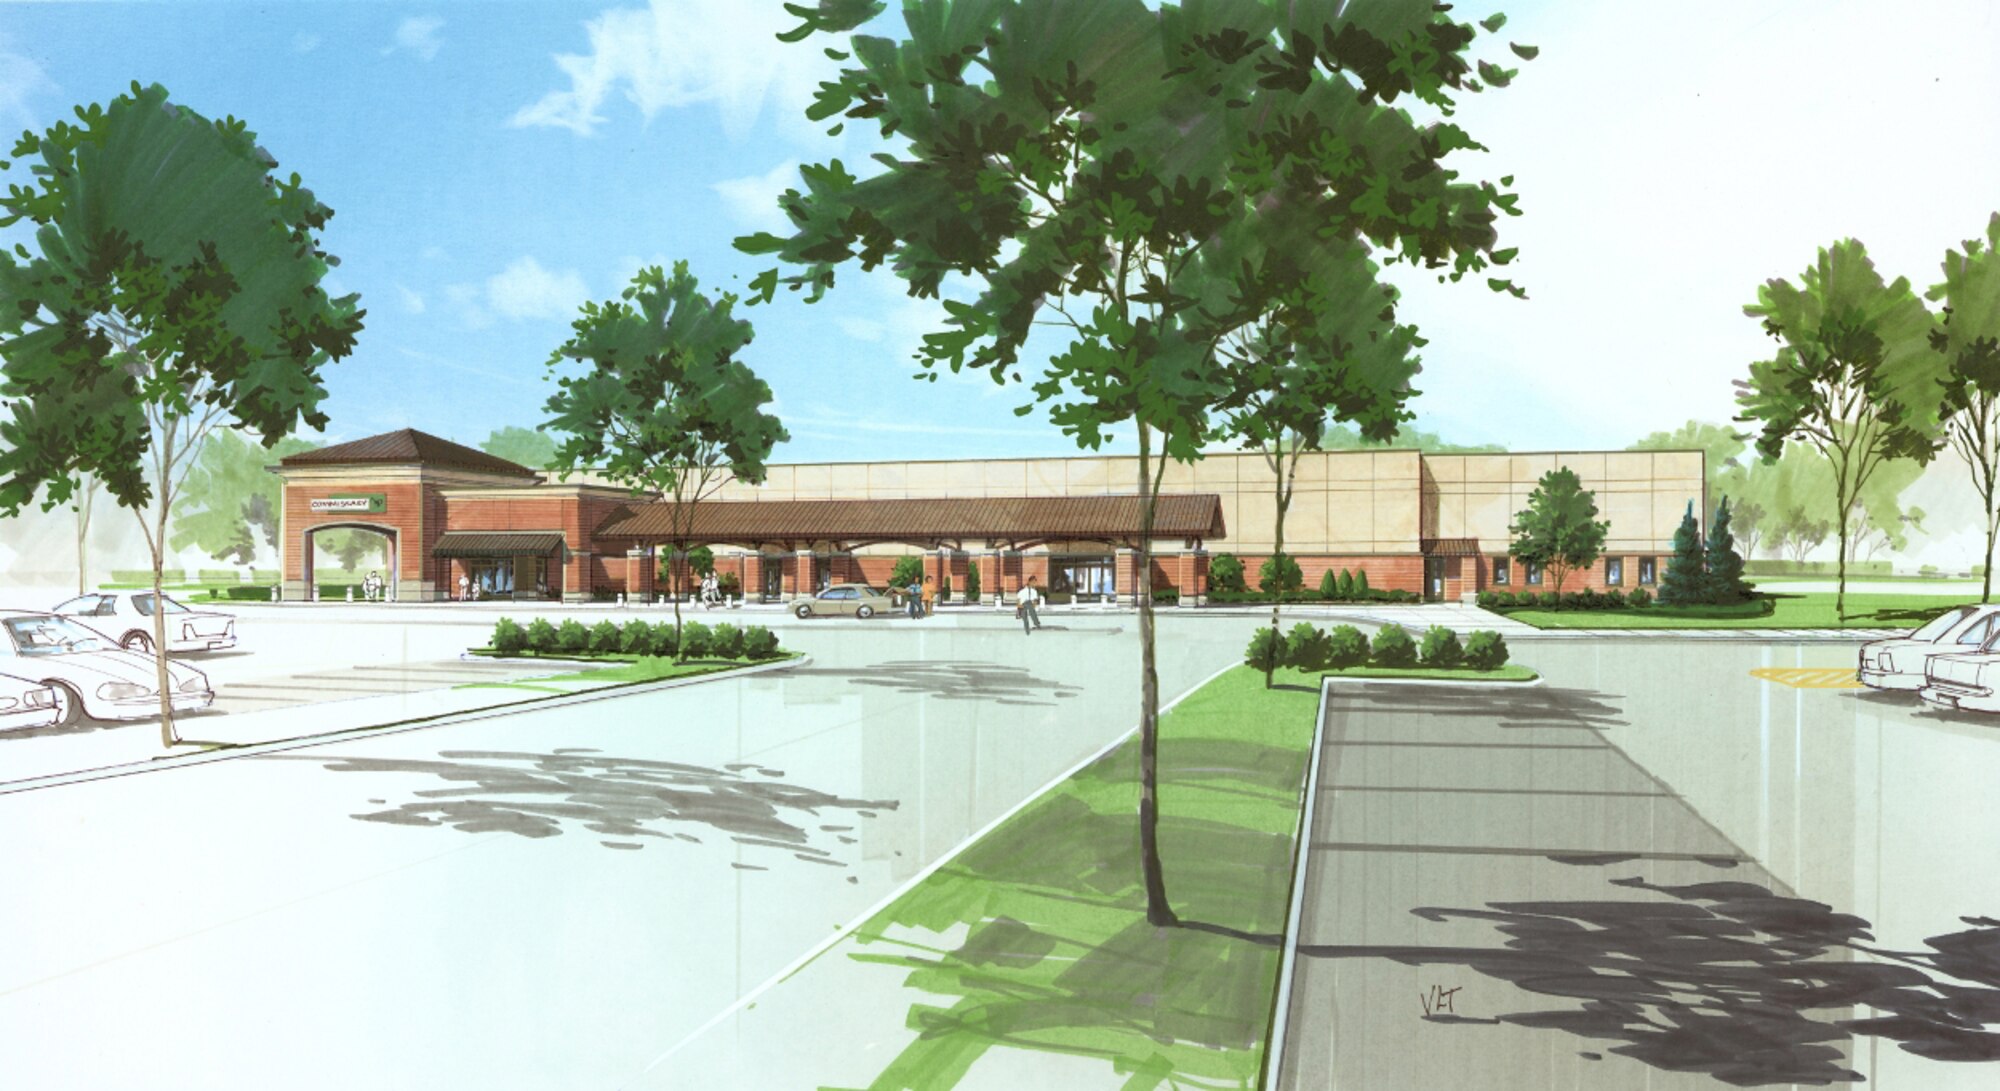 An artist's rendering shows how the new commissary will look.